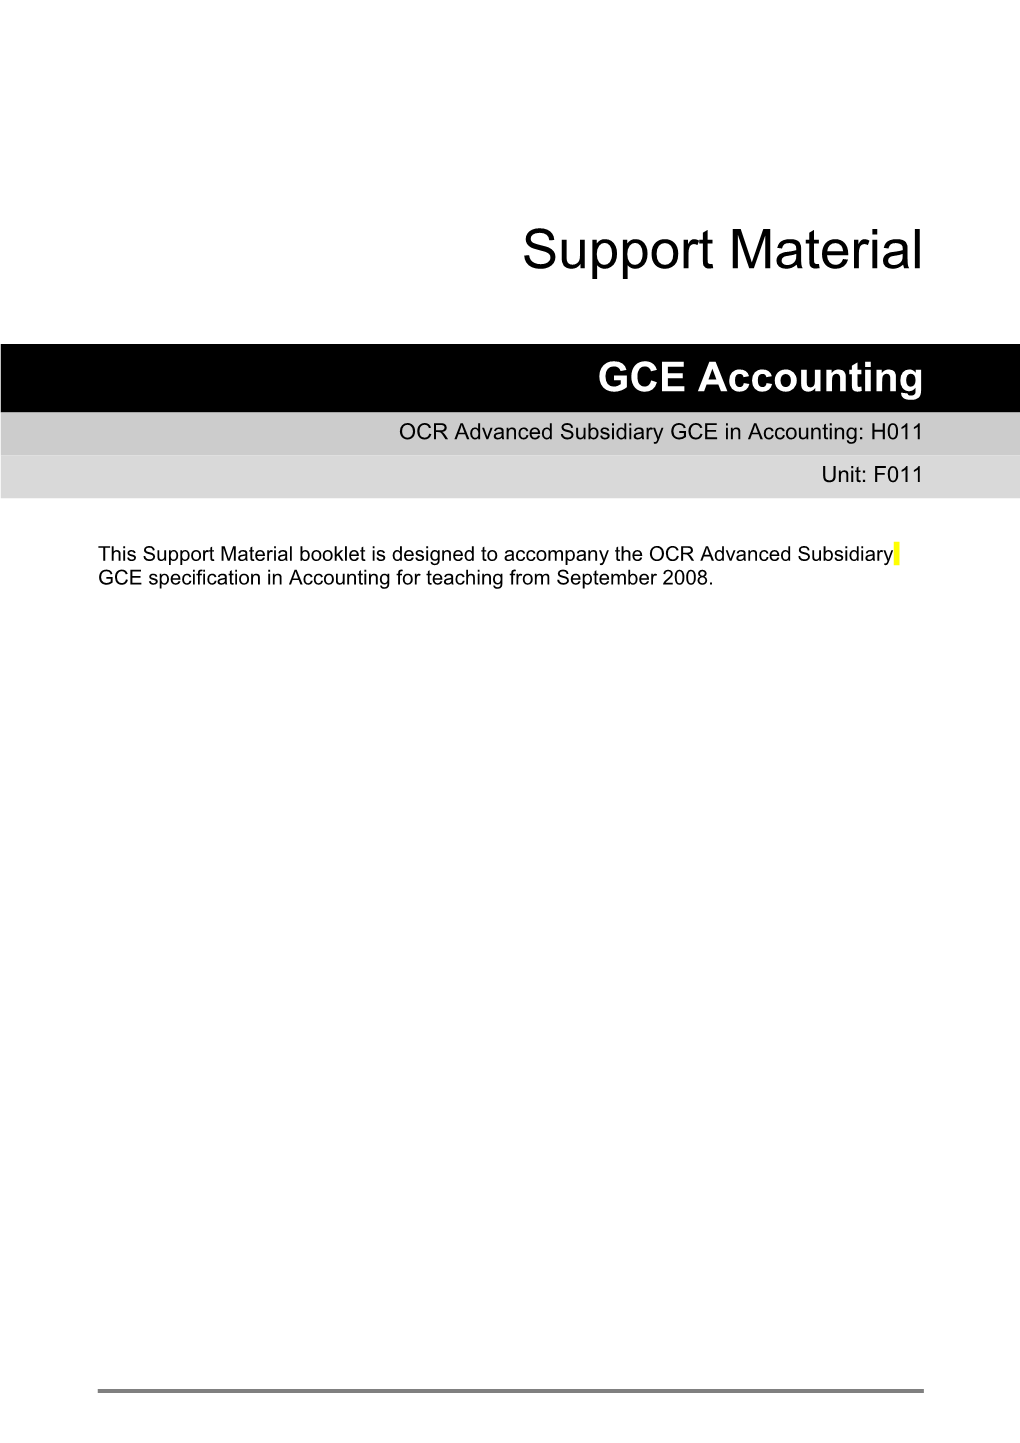 OCR Advanced Subsidiary GCE in Accounting: H011